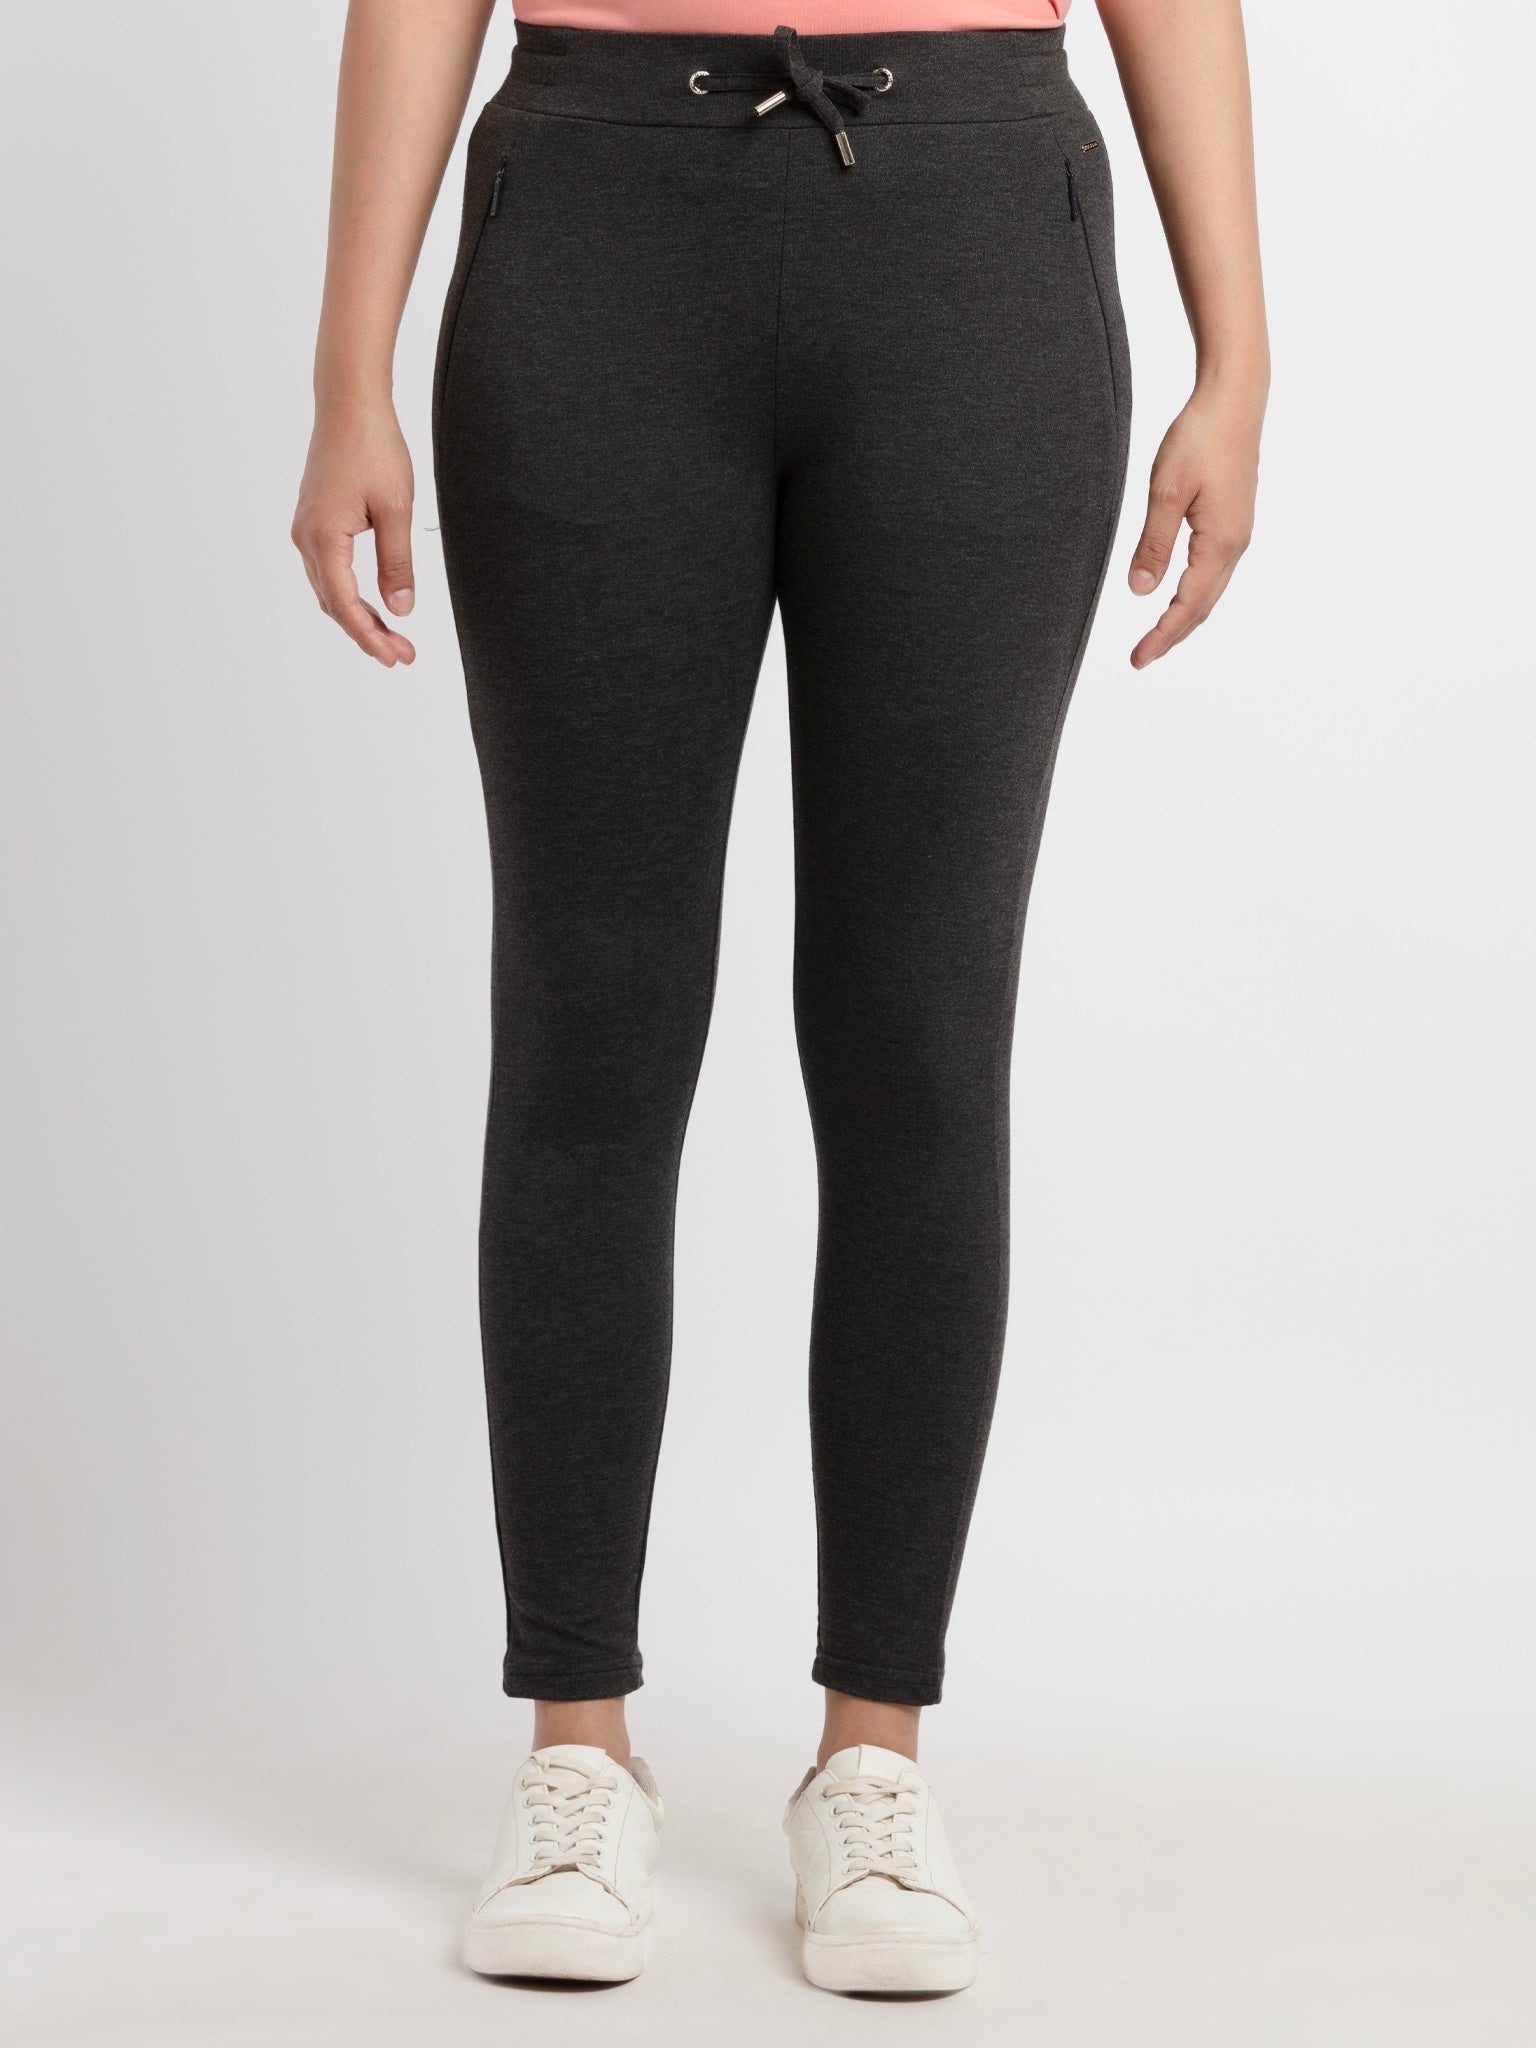 Status Quo | Women'ss Ankle length Solid Joggers